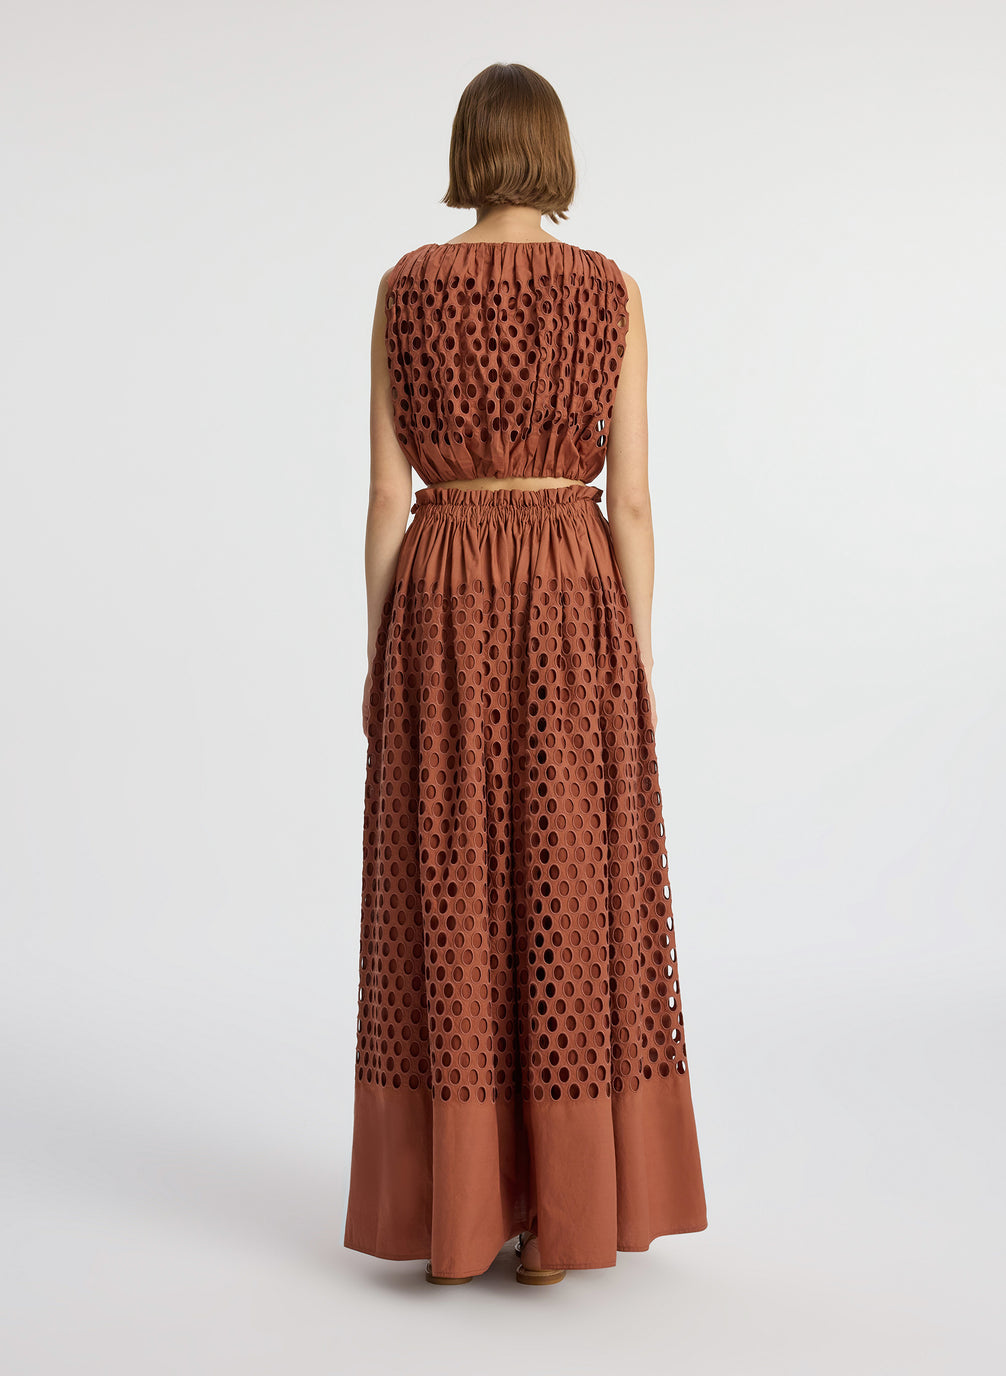 back view of woman wearing brown sleeveless top and matching maxi skirt